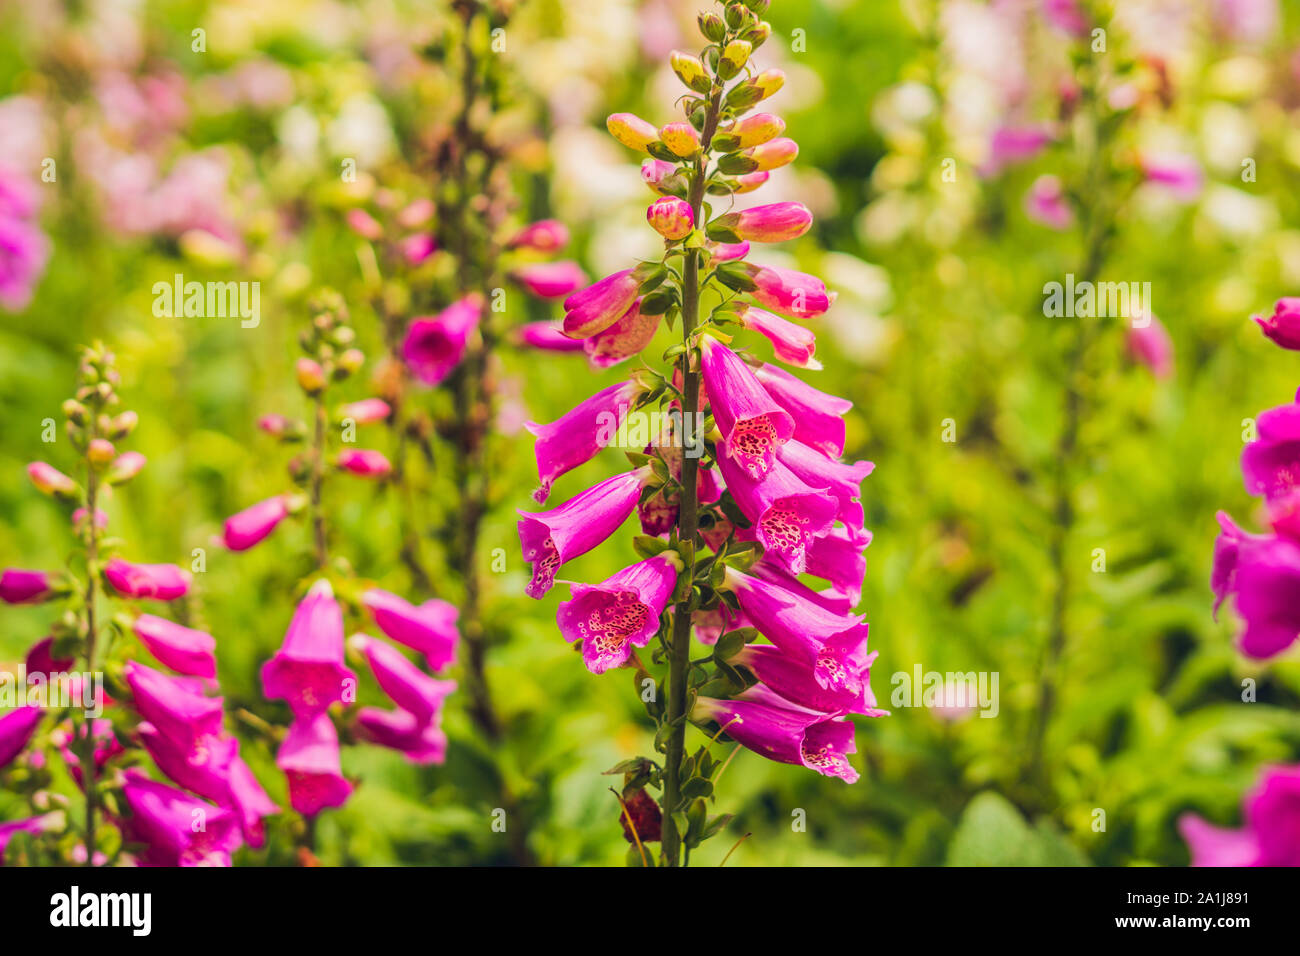 Campanula glomerata, known by the common names clustered bellflower or Dane's blood. Stock Photo